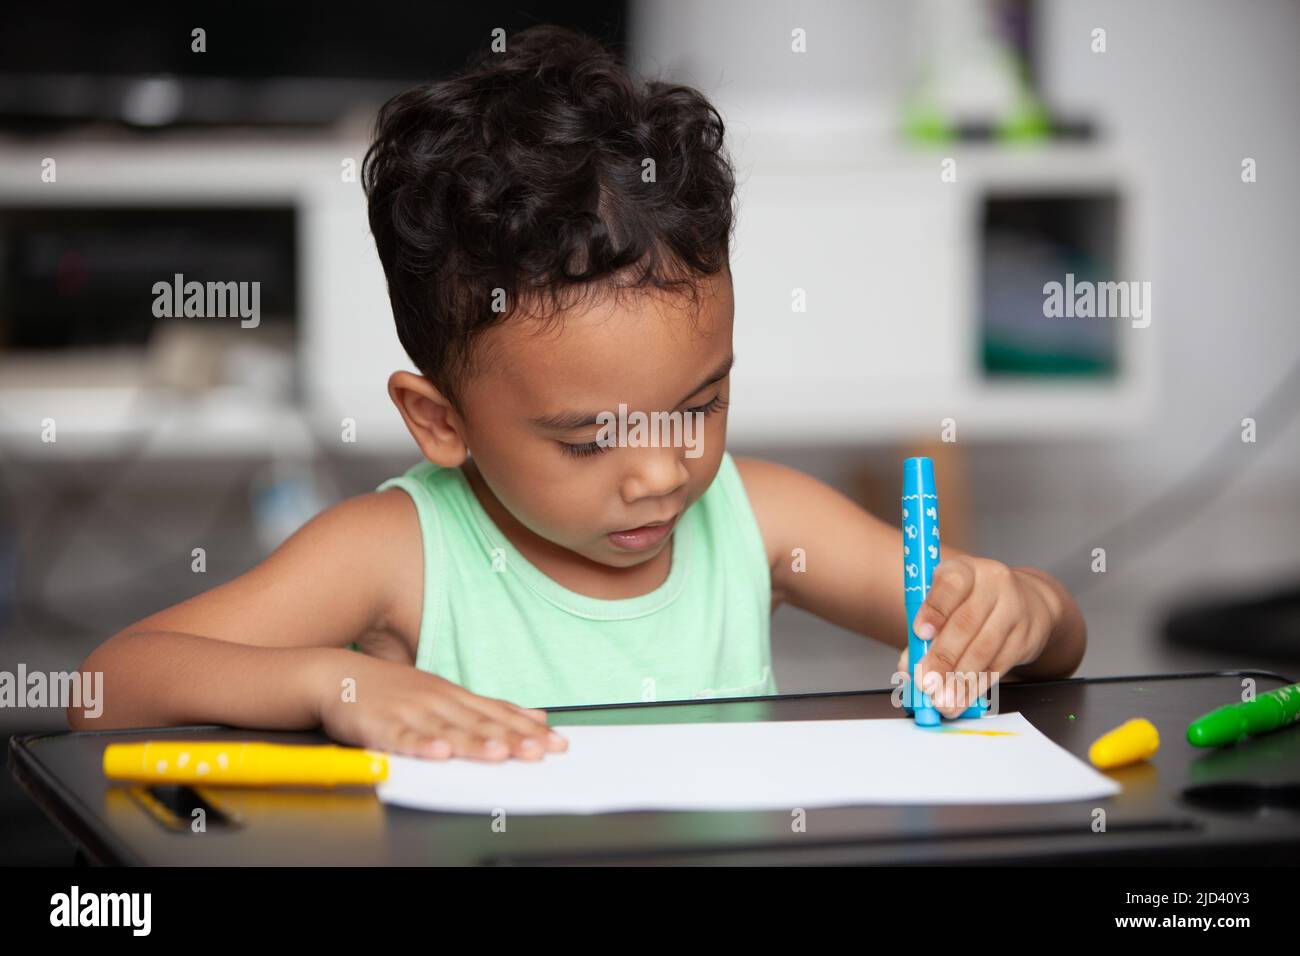 An Indonesian young boy in a light green t-shirt holding a blue crayon to color a white sheet of paper on a black table in the living room Stock Photo